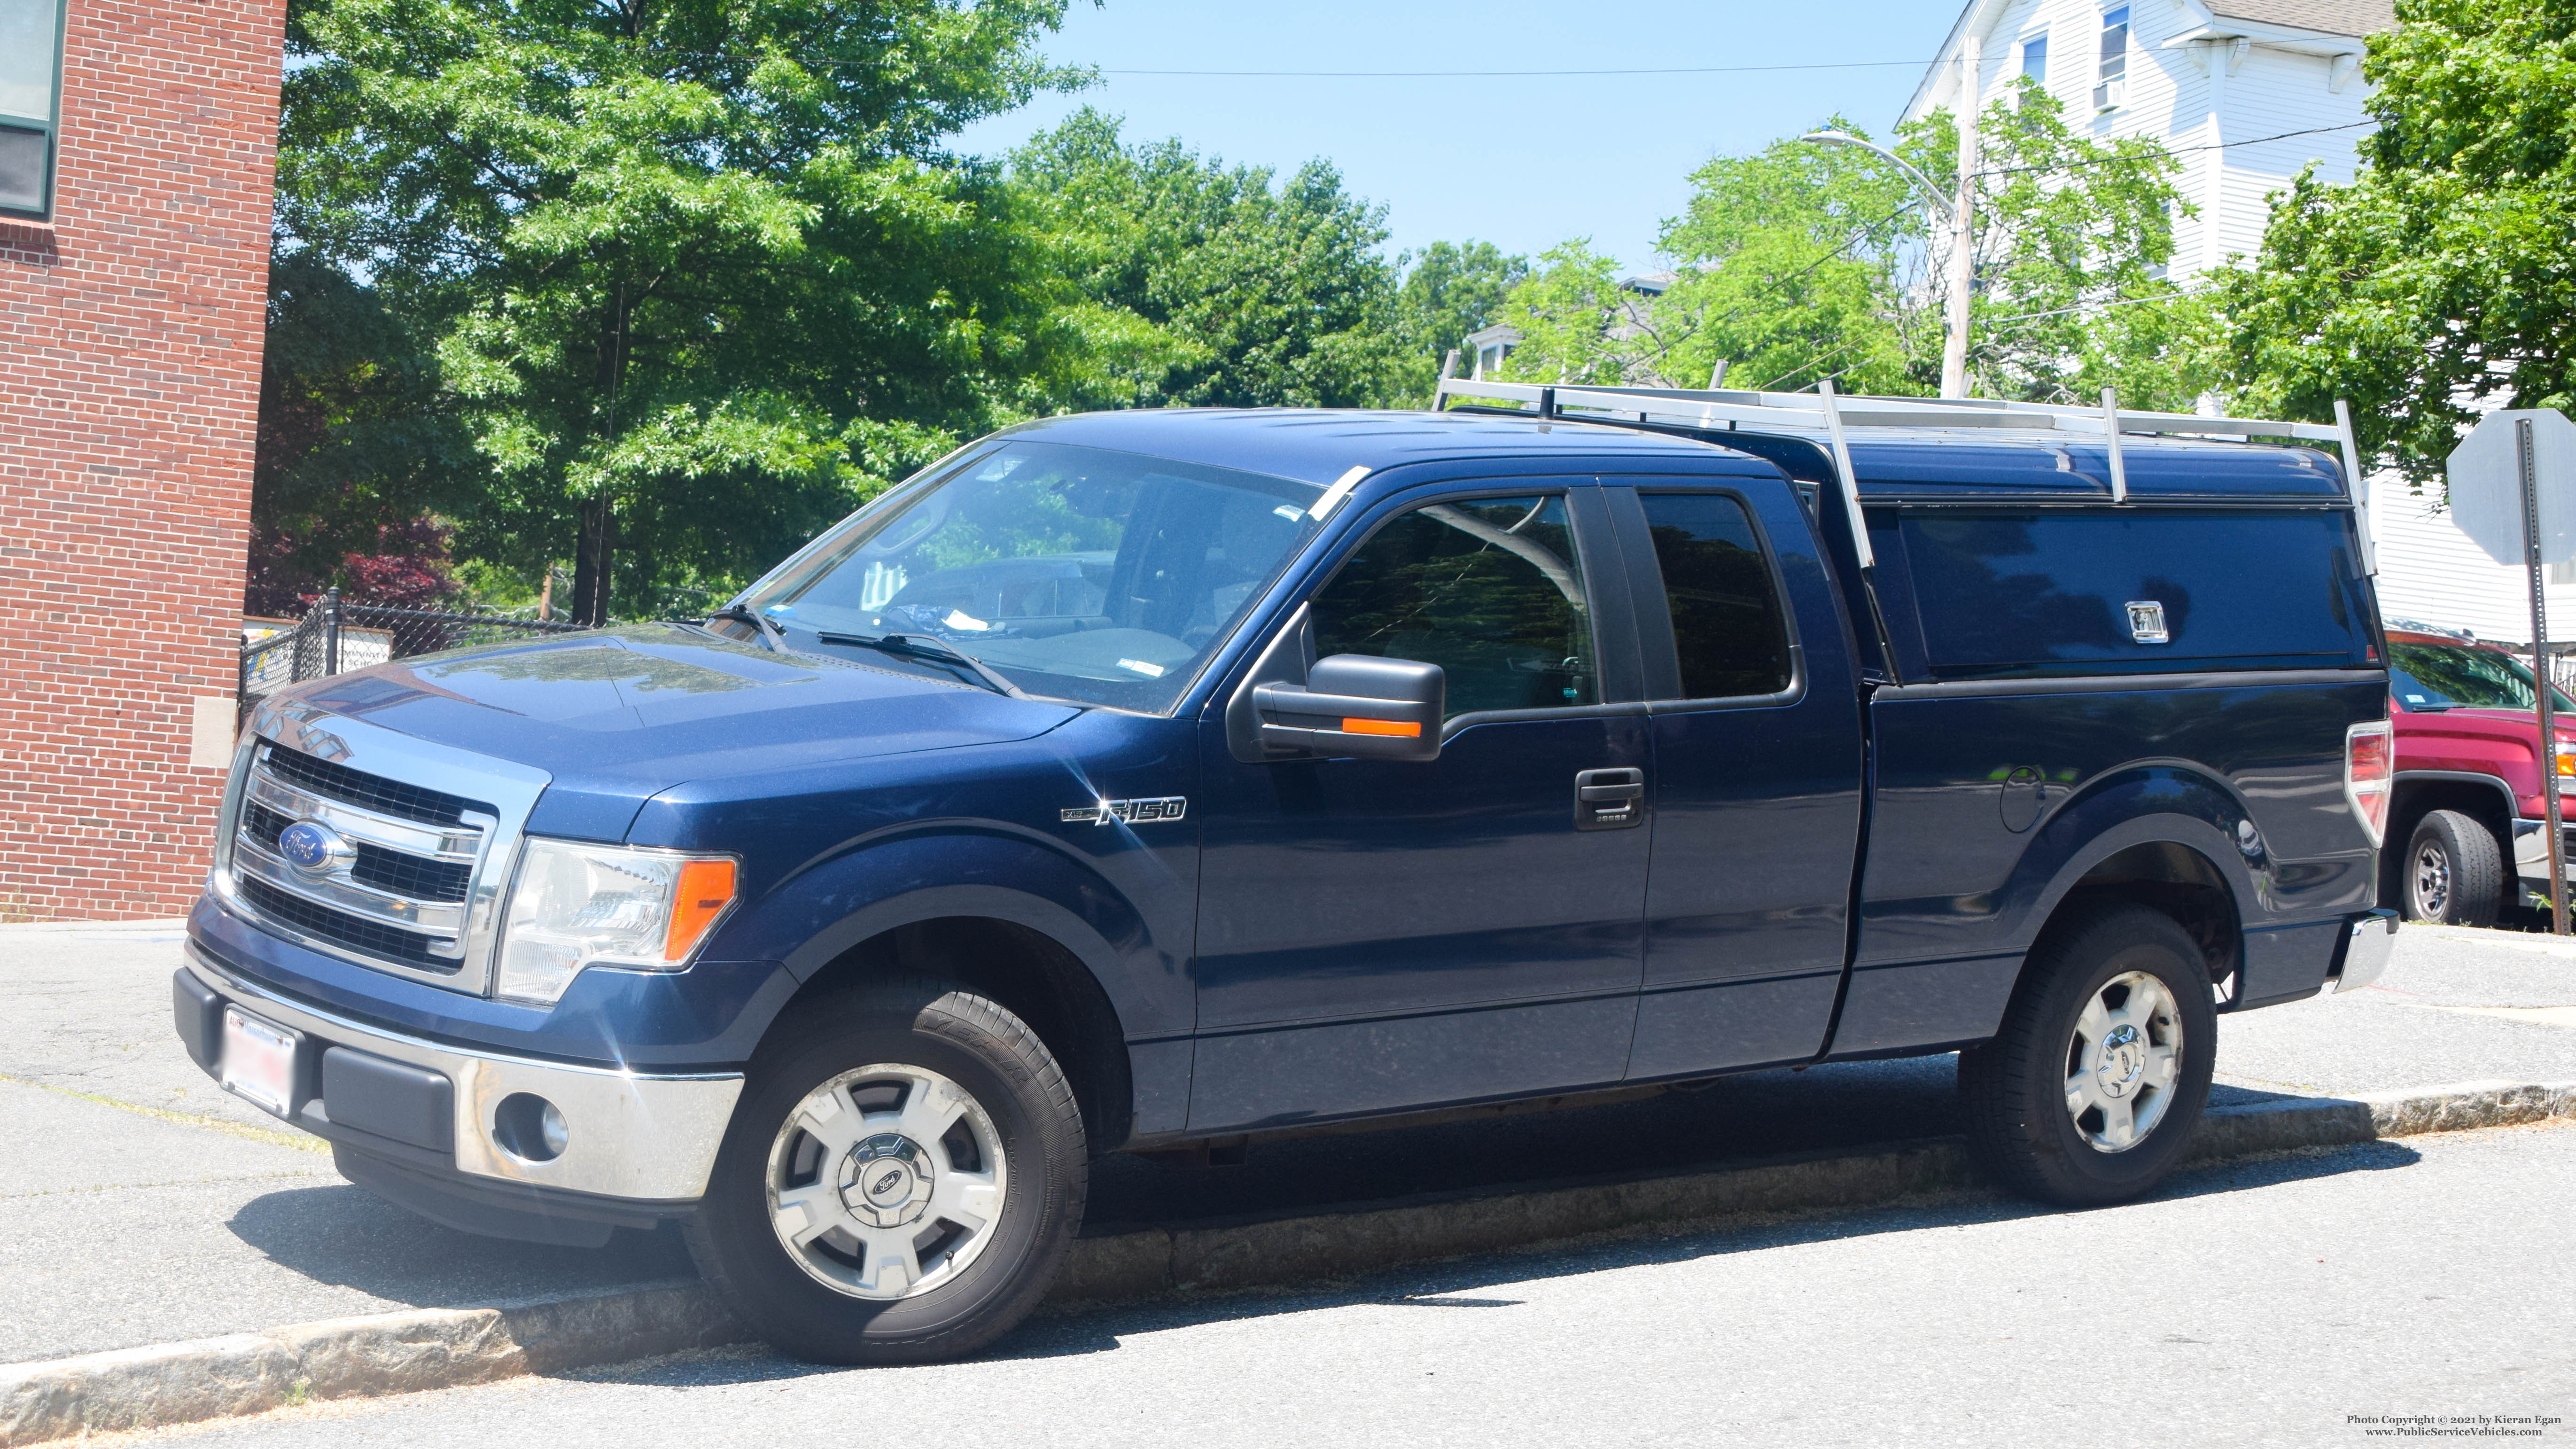 A photo  of Massachusetts State Police
            Unmarked Unit, a 2009-2014 Ford F-150 XLT SuperCab             taken by Kieran Egan